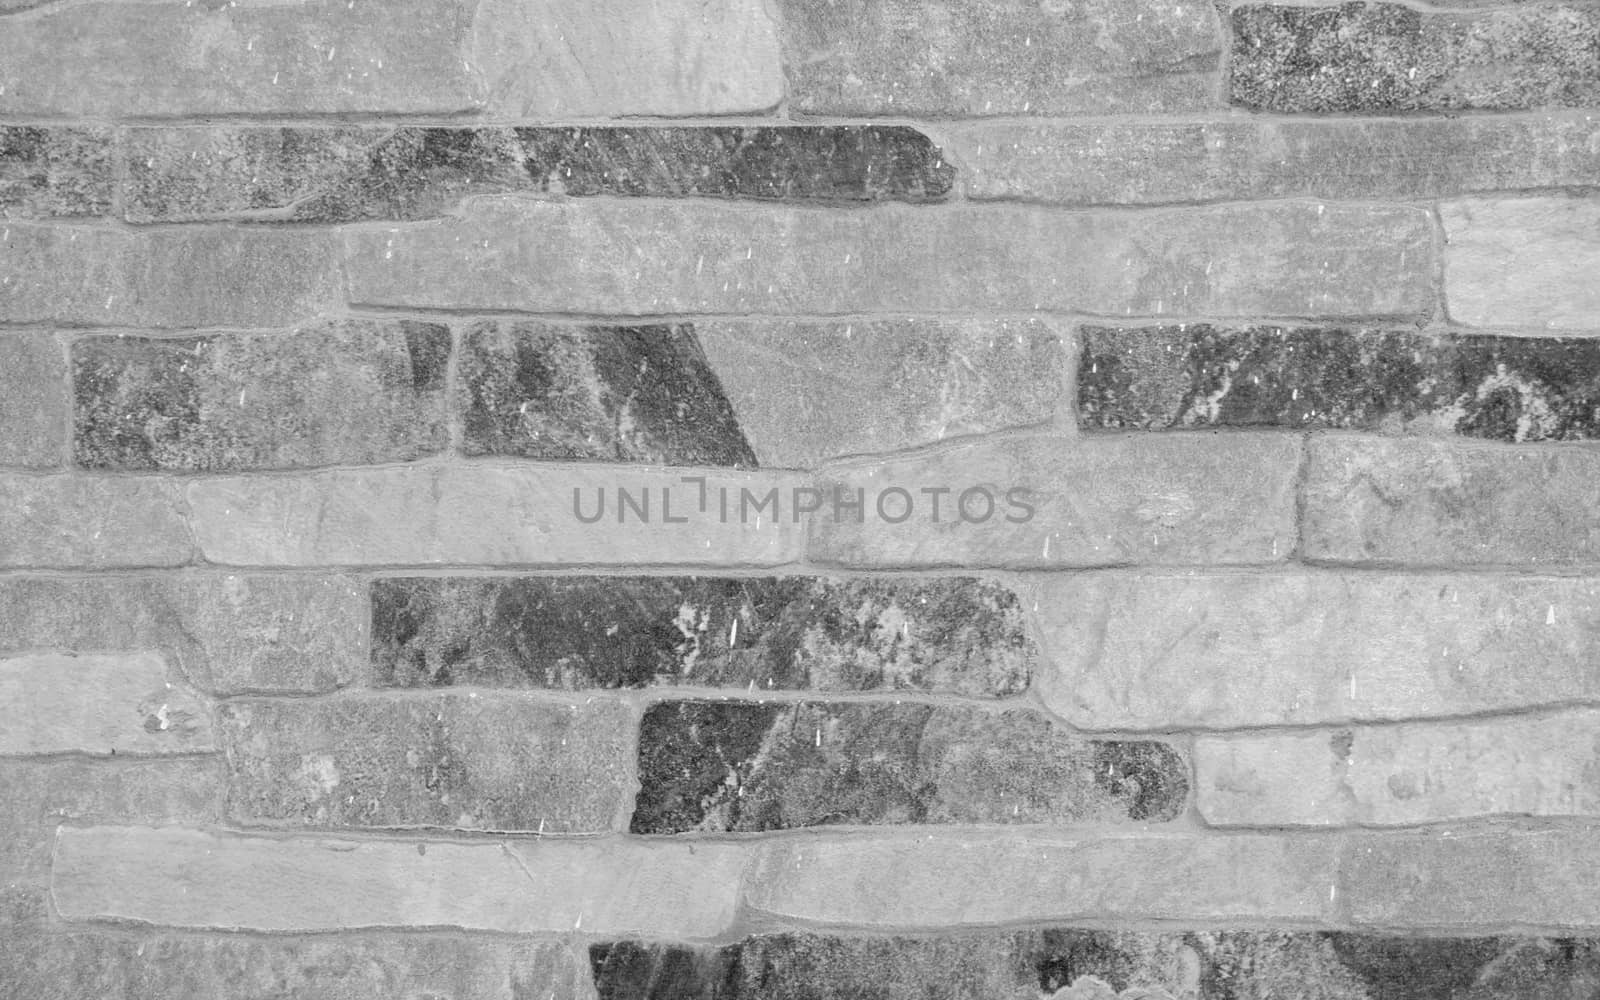 Faced wall with decorative capstone in black and white - background